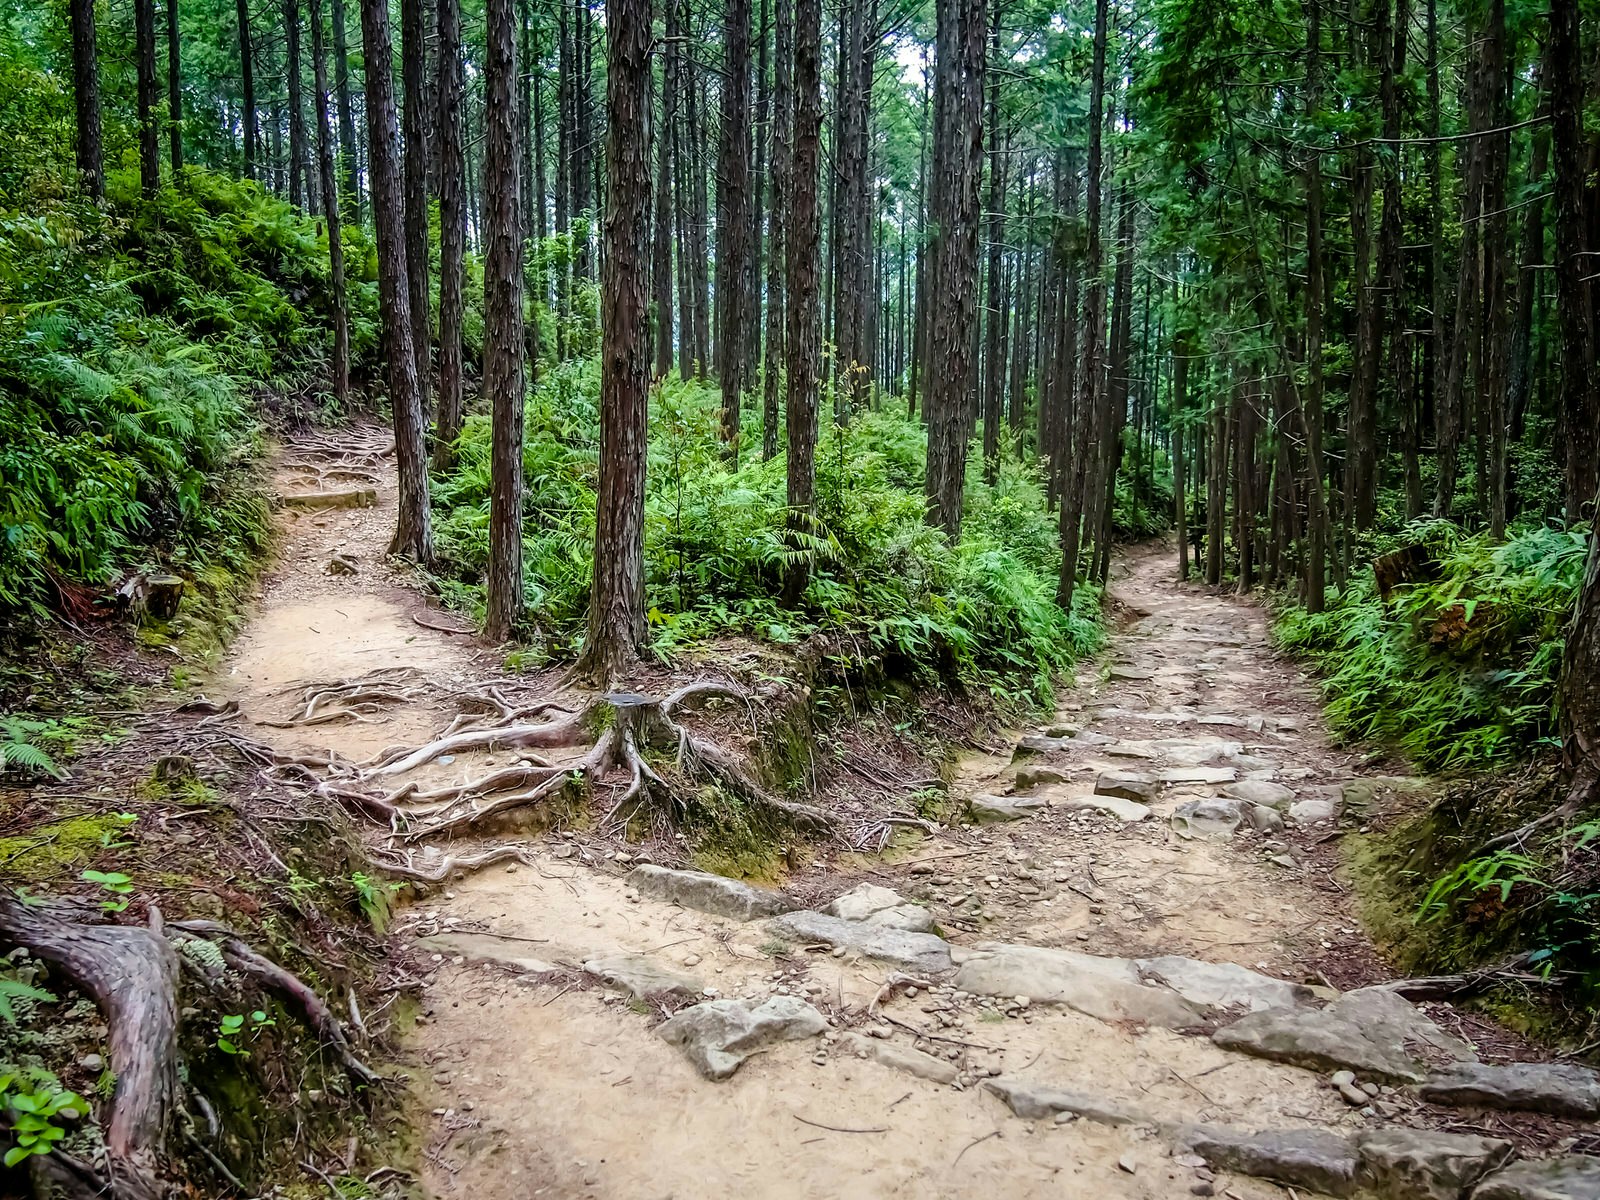 Two trails diverge in the woods on the Kumano Kodō pilgrimage route